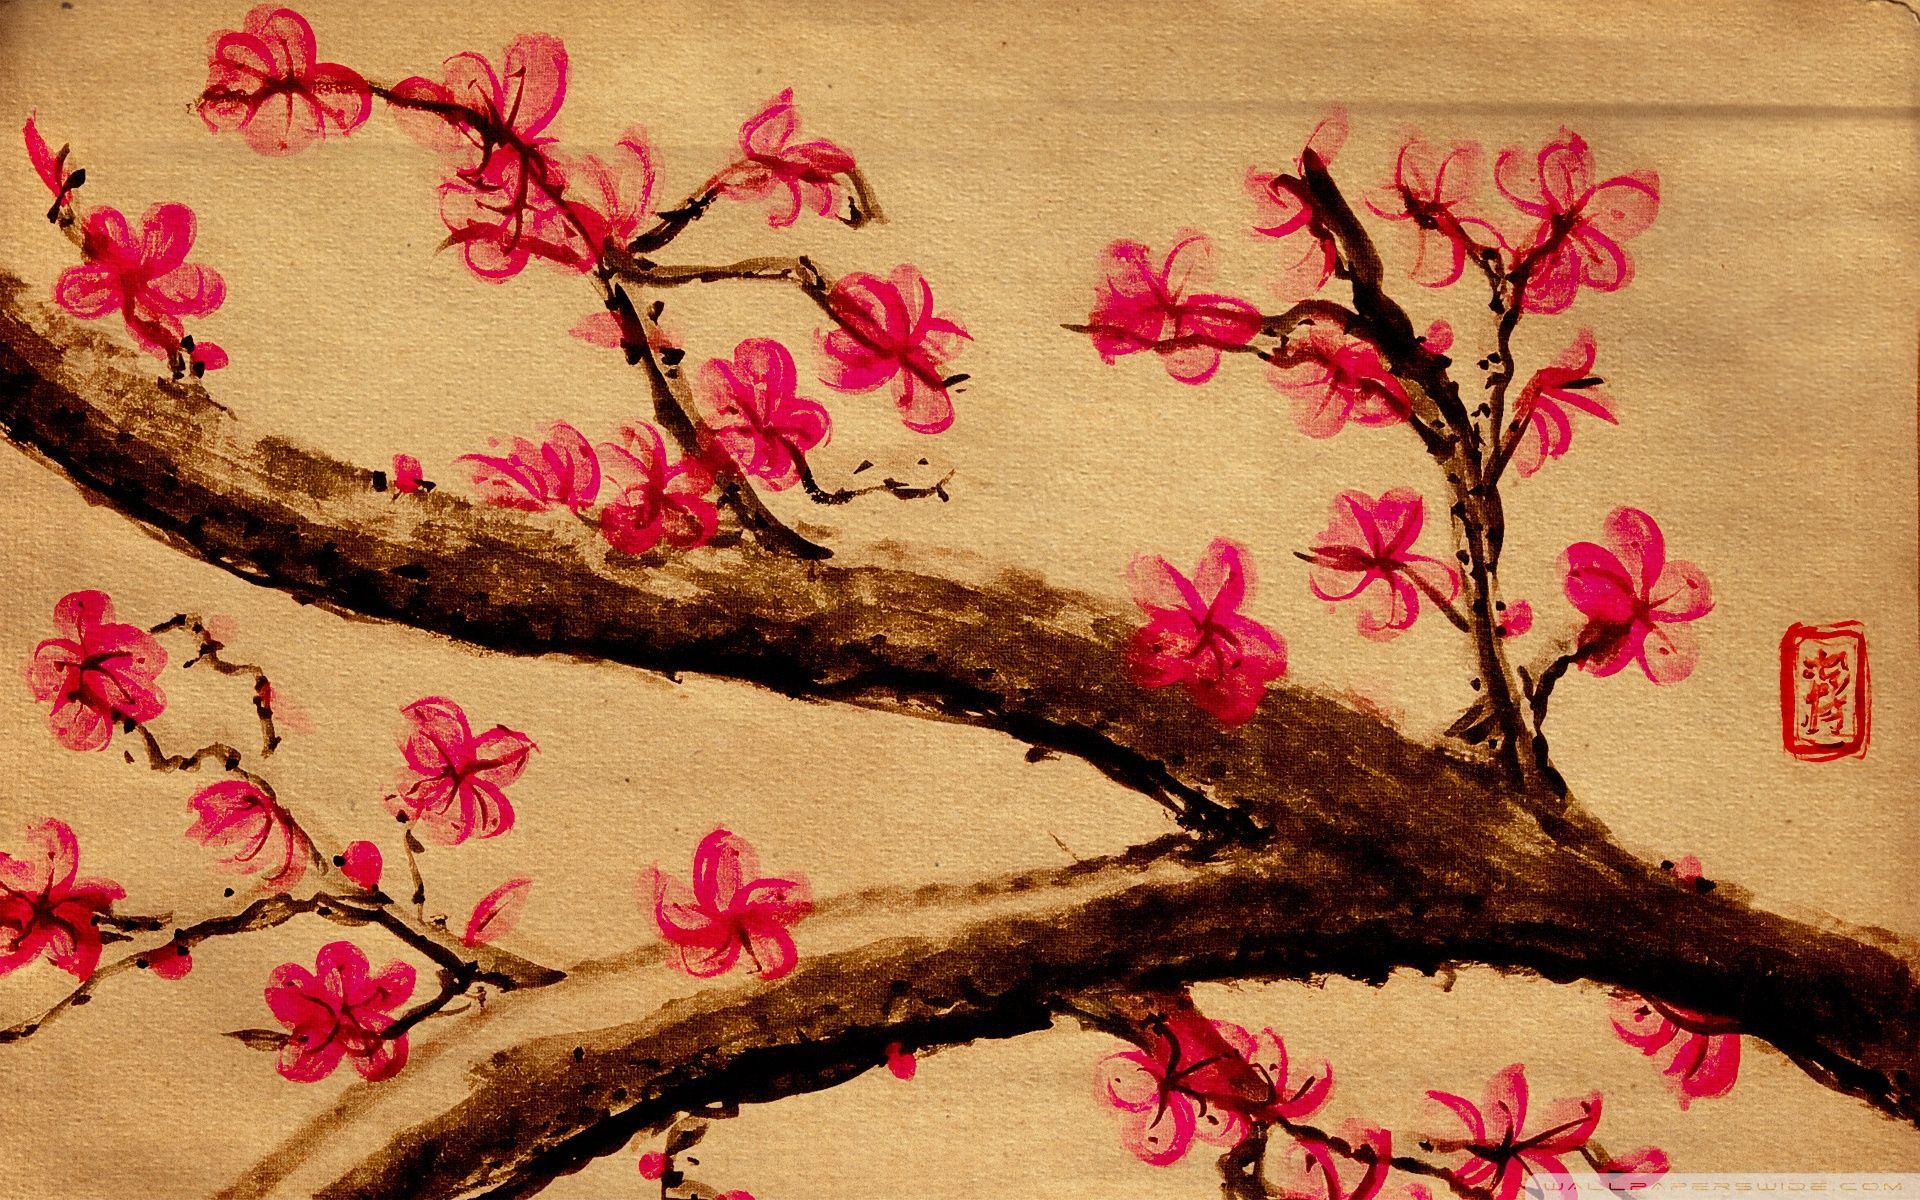 Cherry Blossom Painting Wallpaper Free Cherry Blossom Painting Background